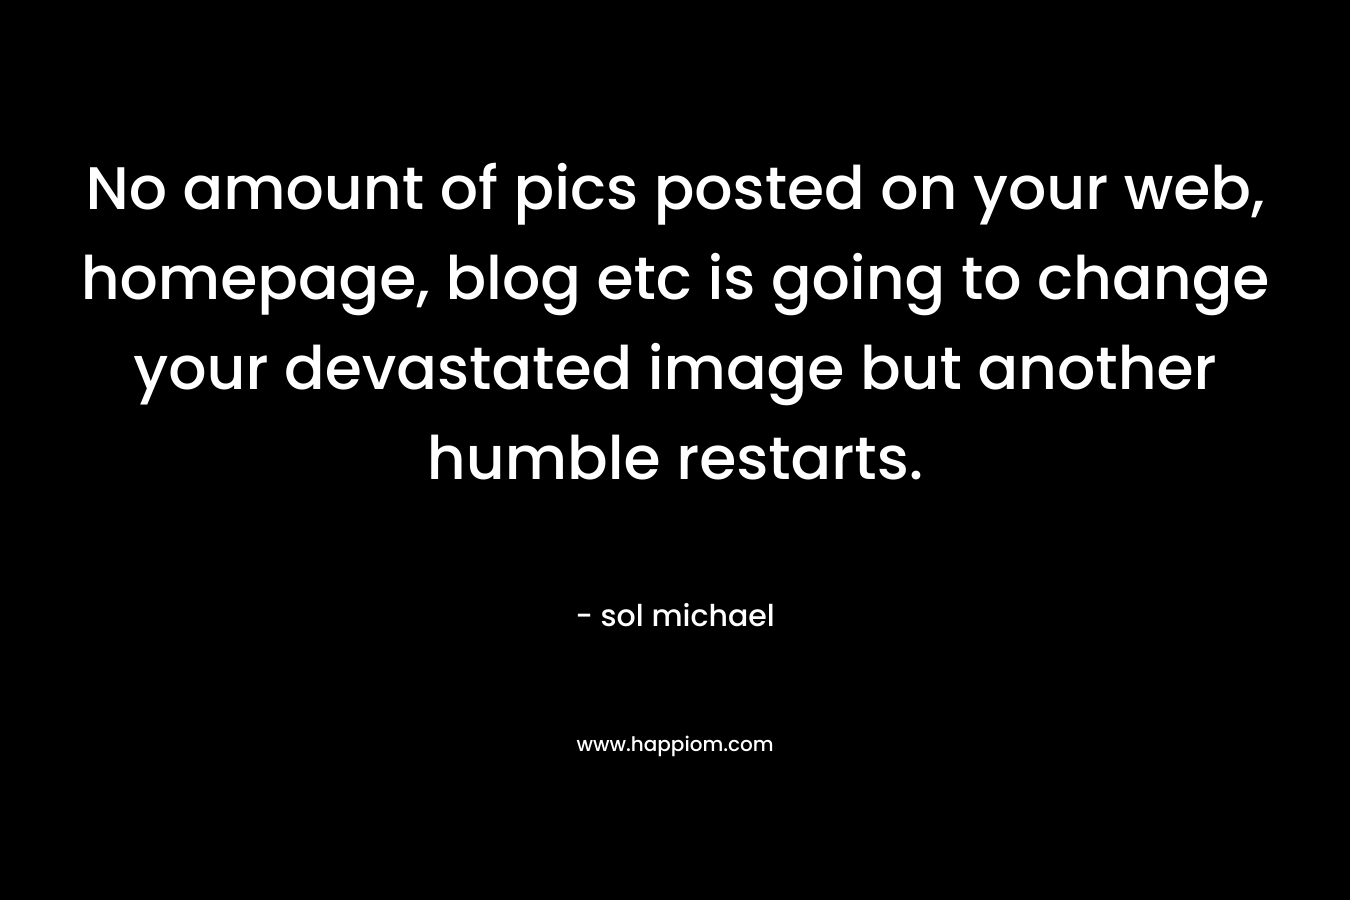 No amount of pics posted on your web, homepage, blog etc is going to change your devastated image but another humble restarts.